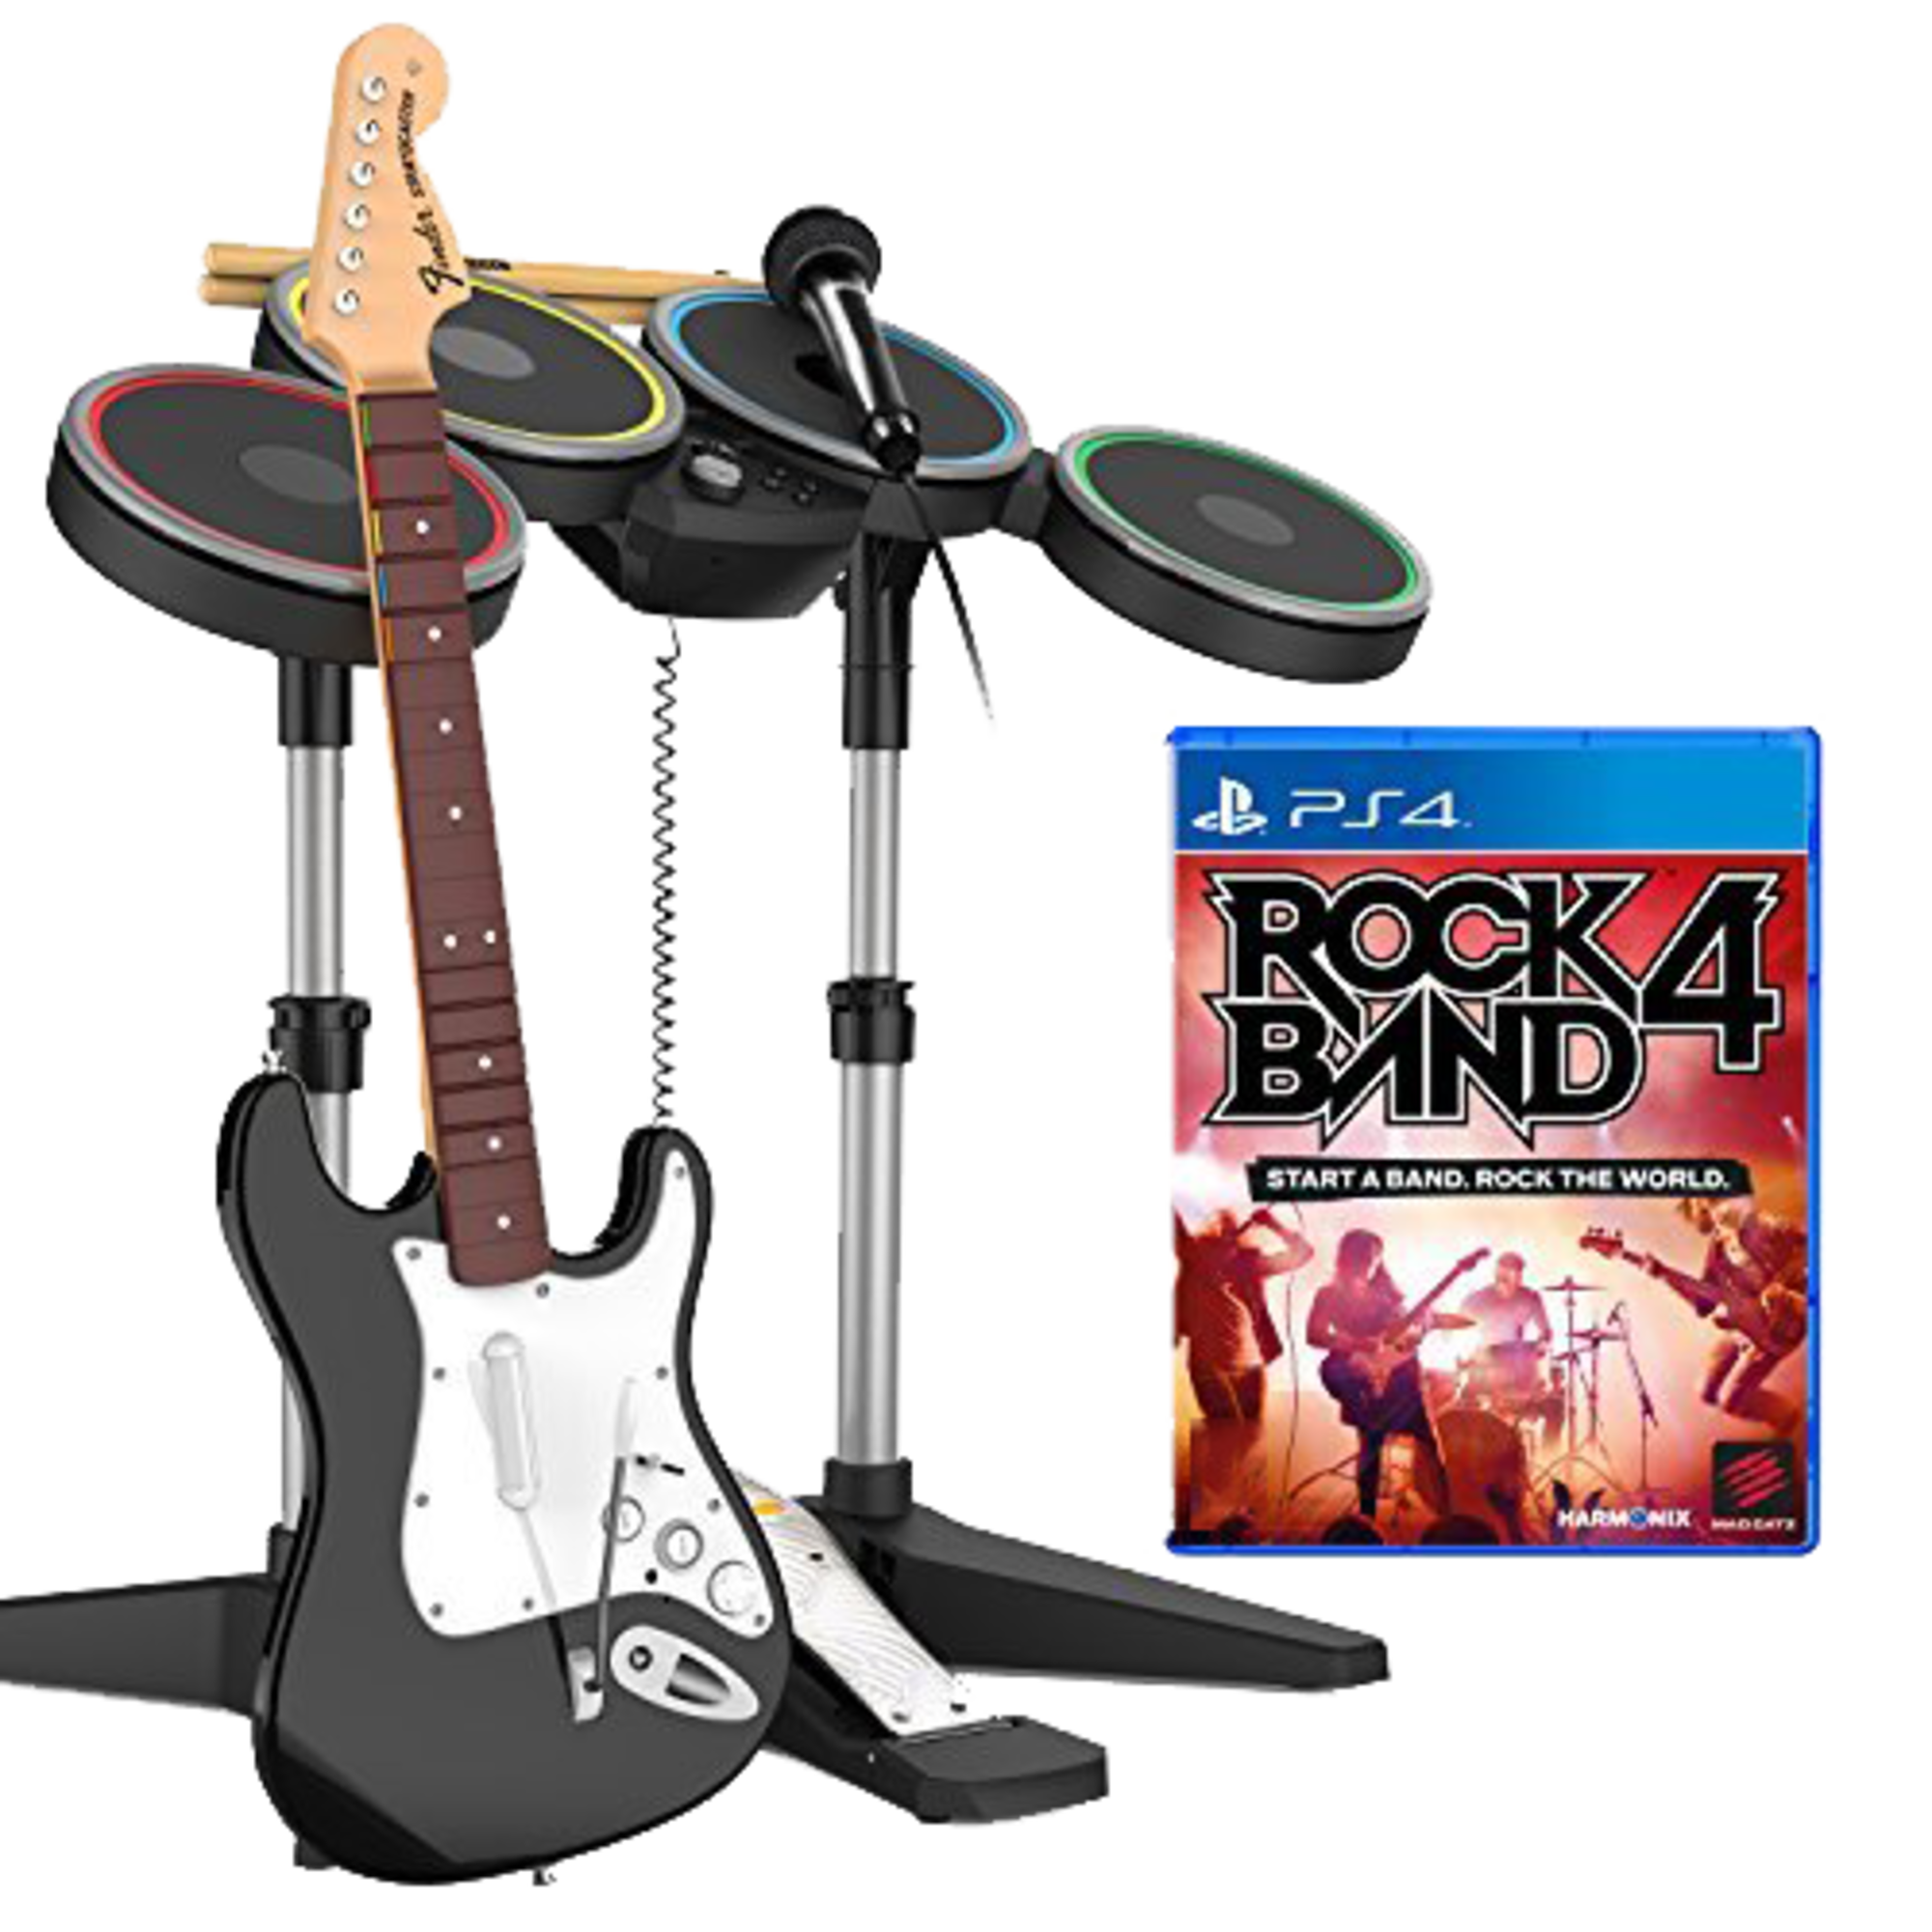 rock band 4 band in a box black friday